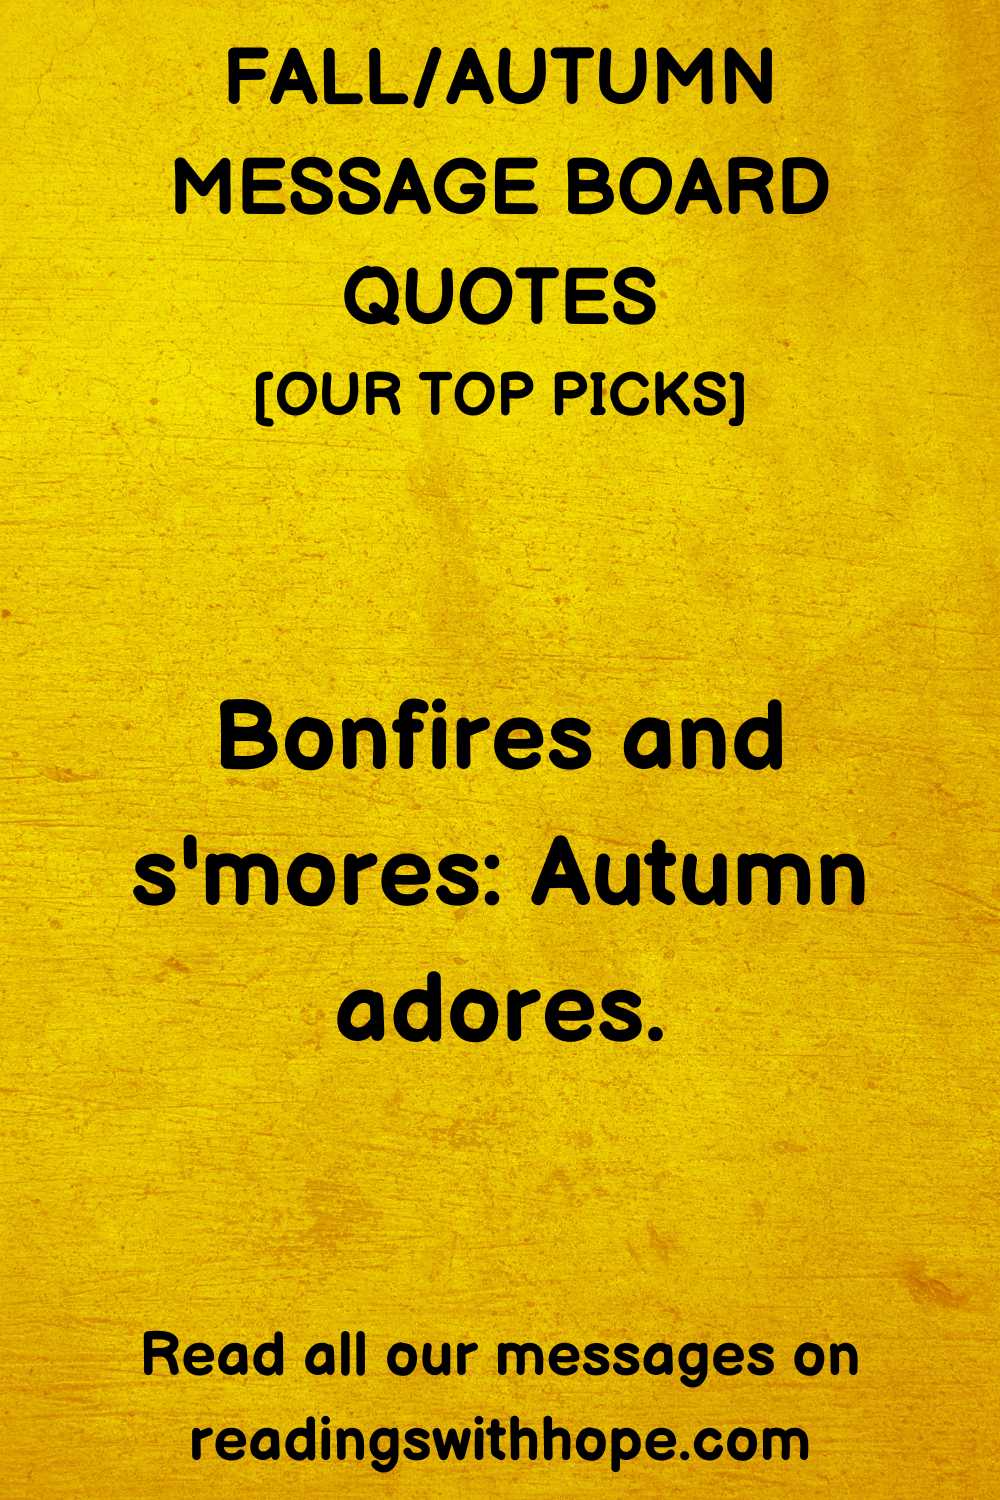 100 Fall/Autumn Message Board Quotes